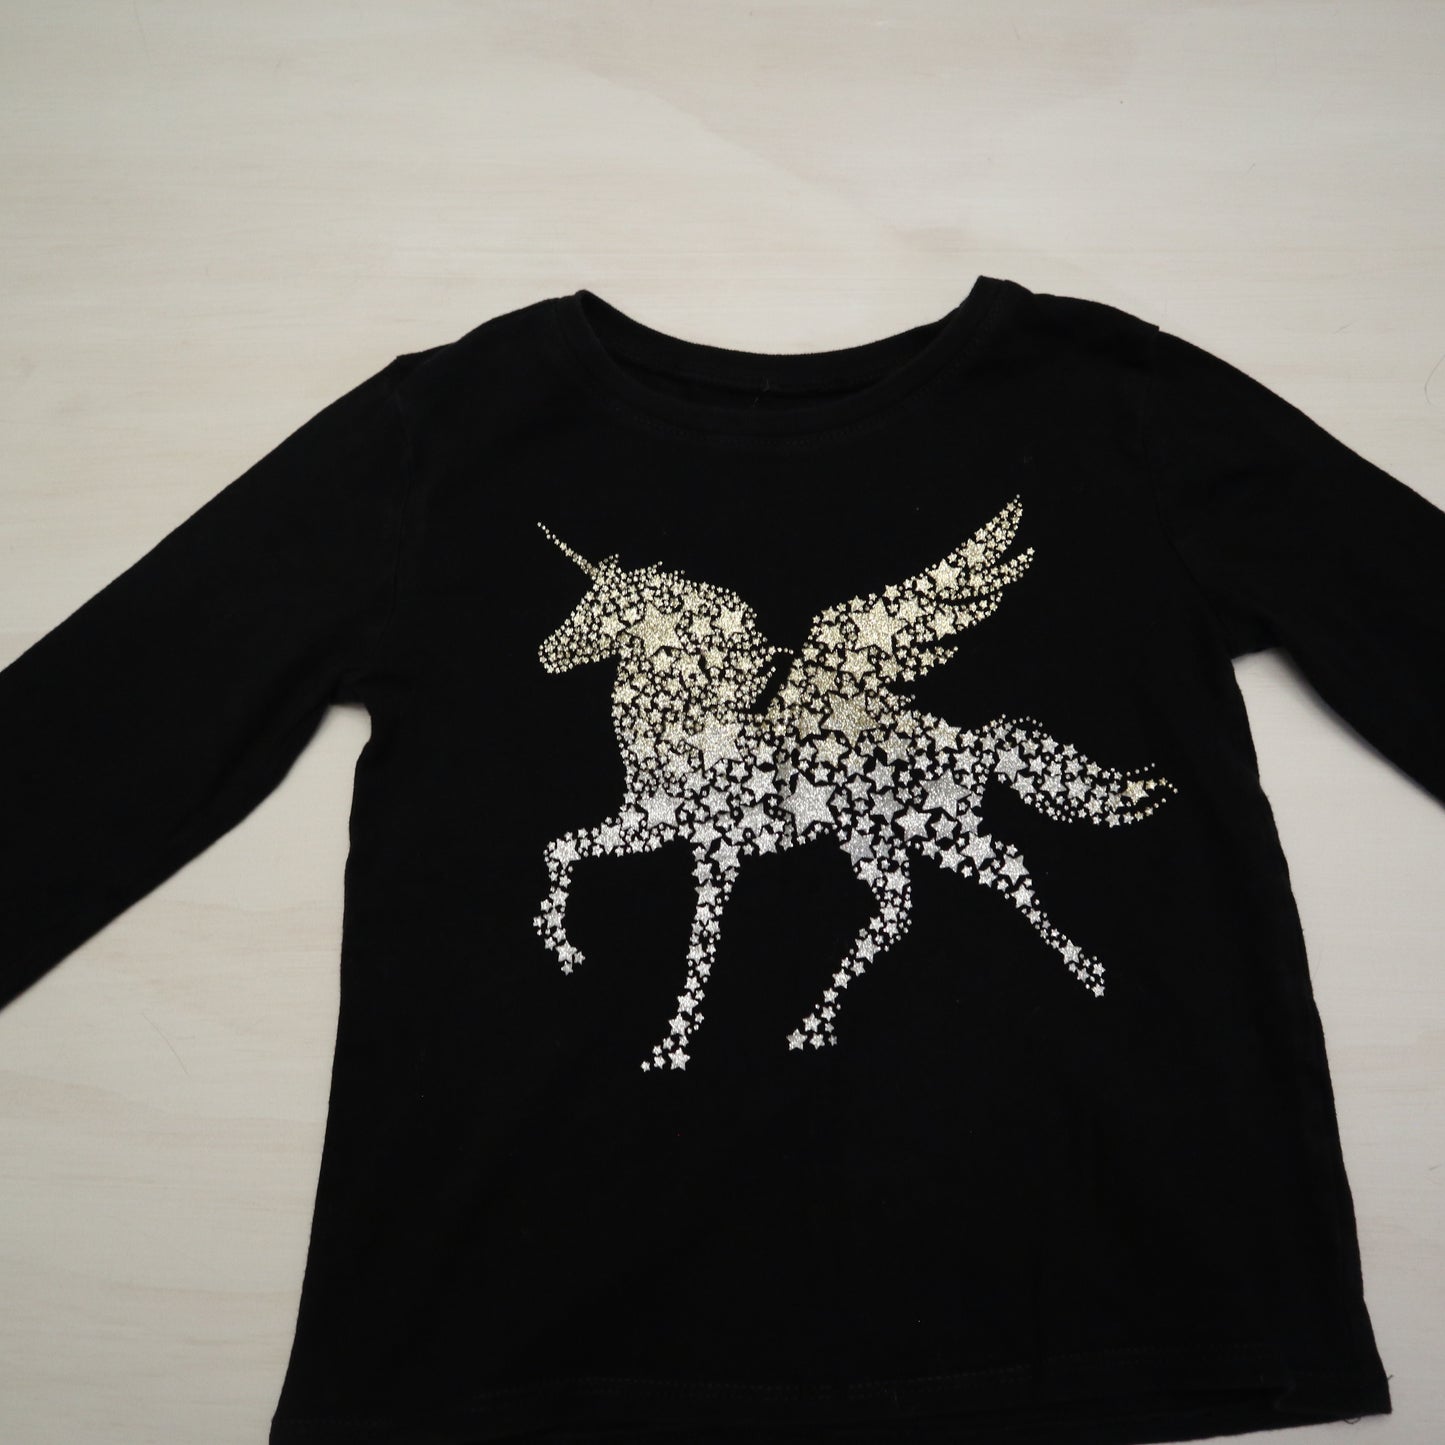 Children's Place - Long Sleeve (4)